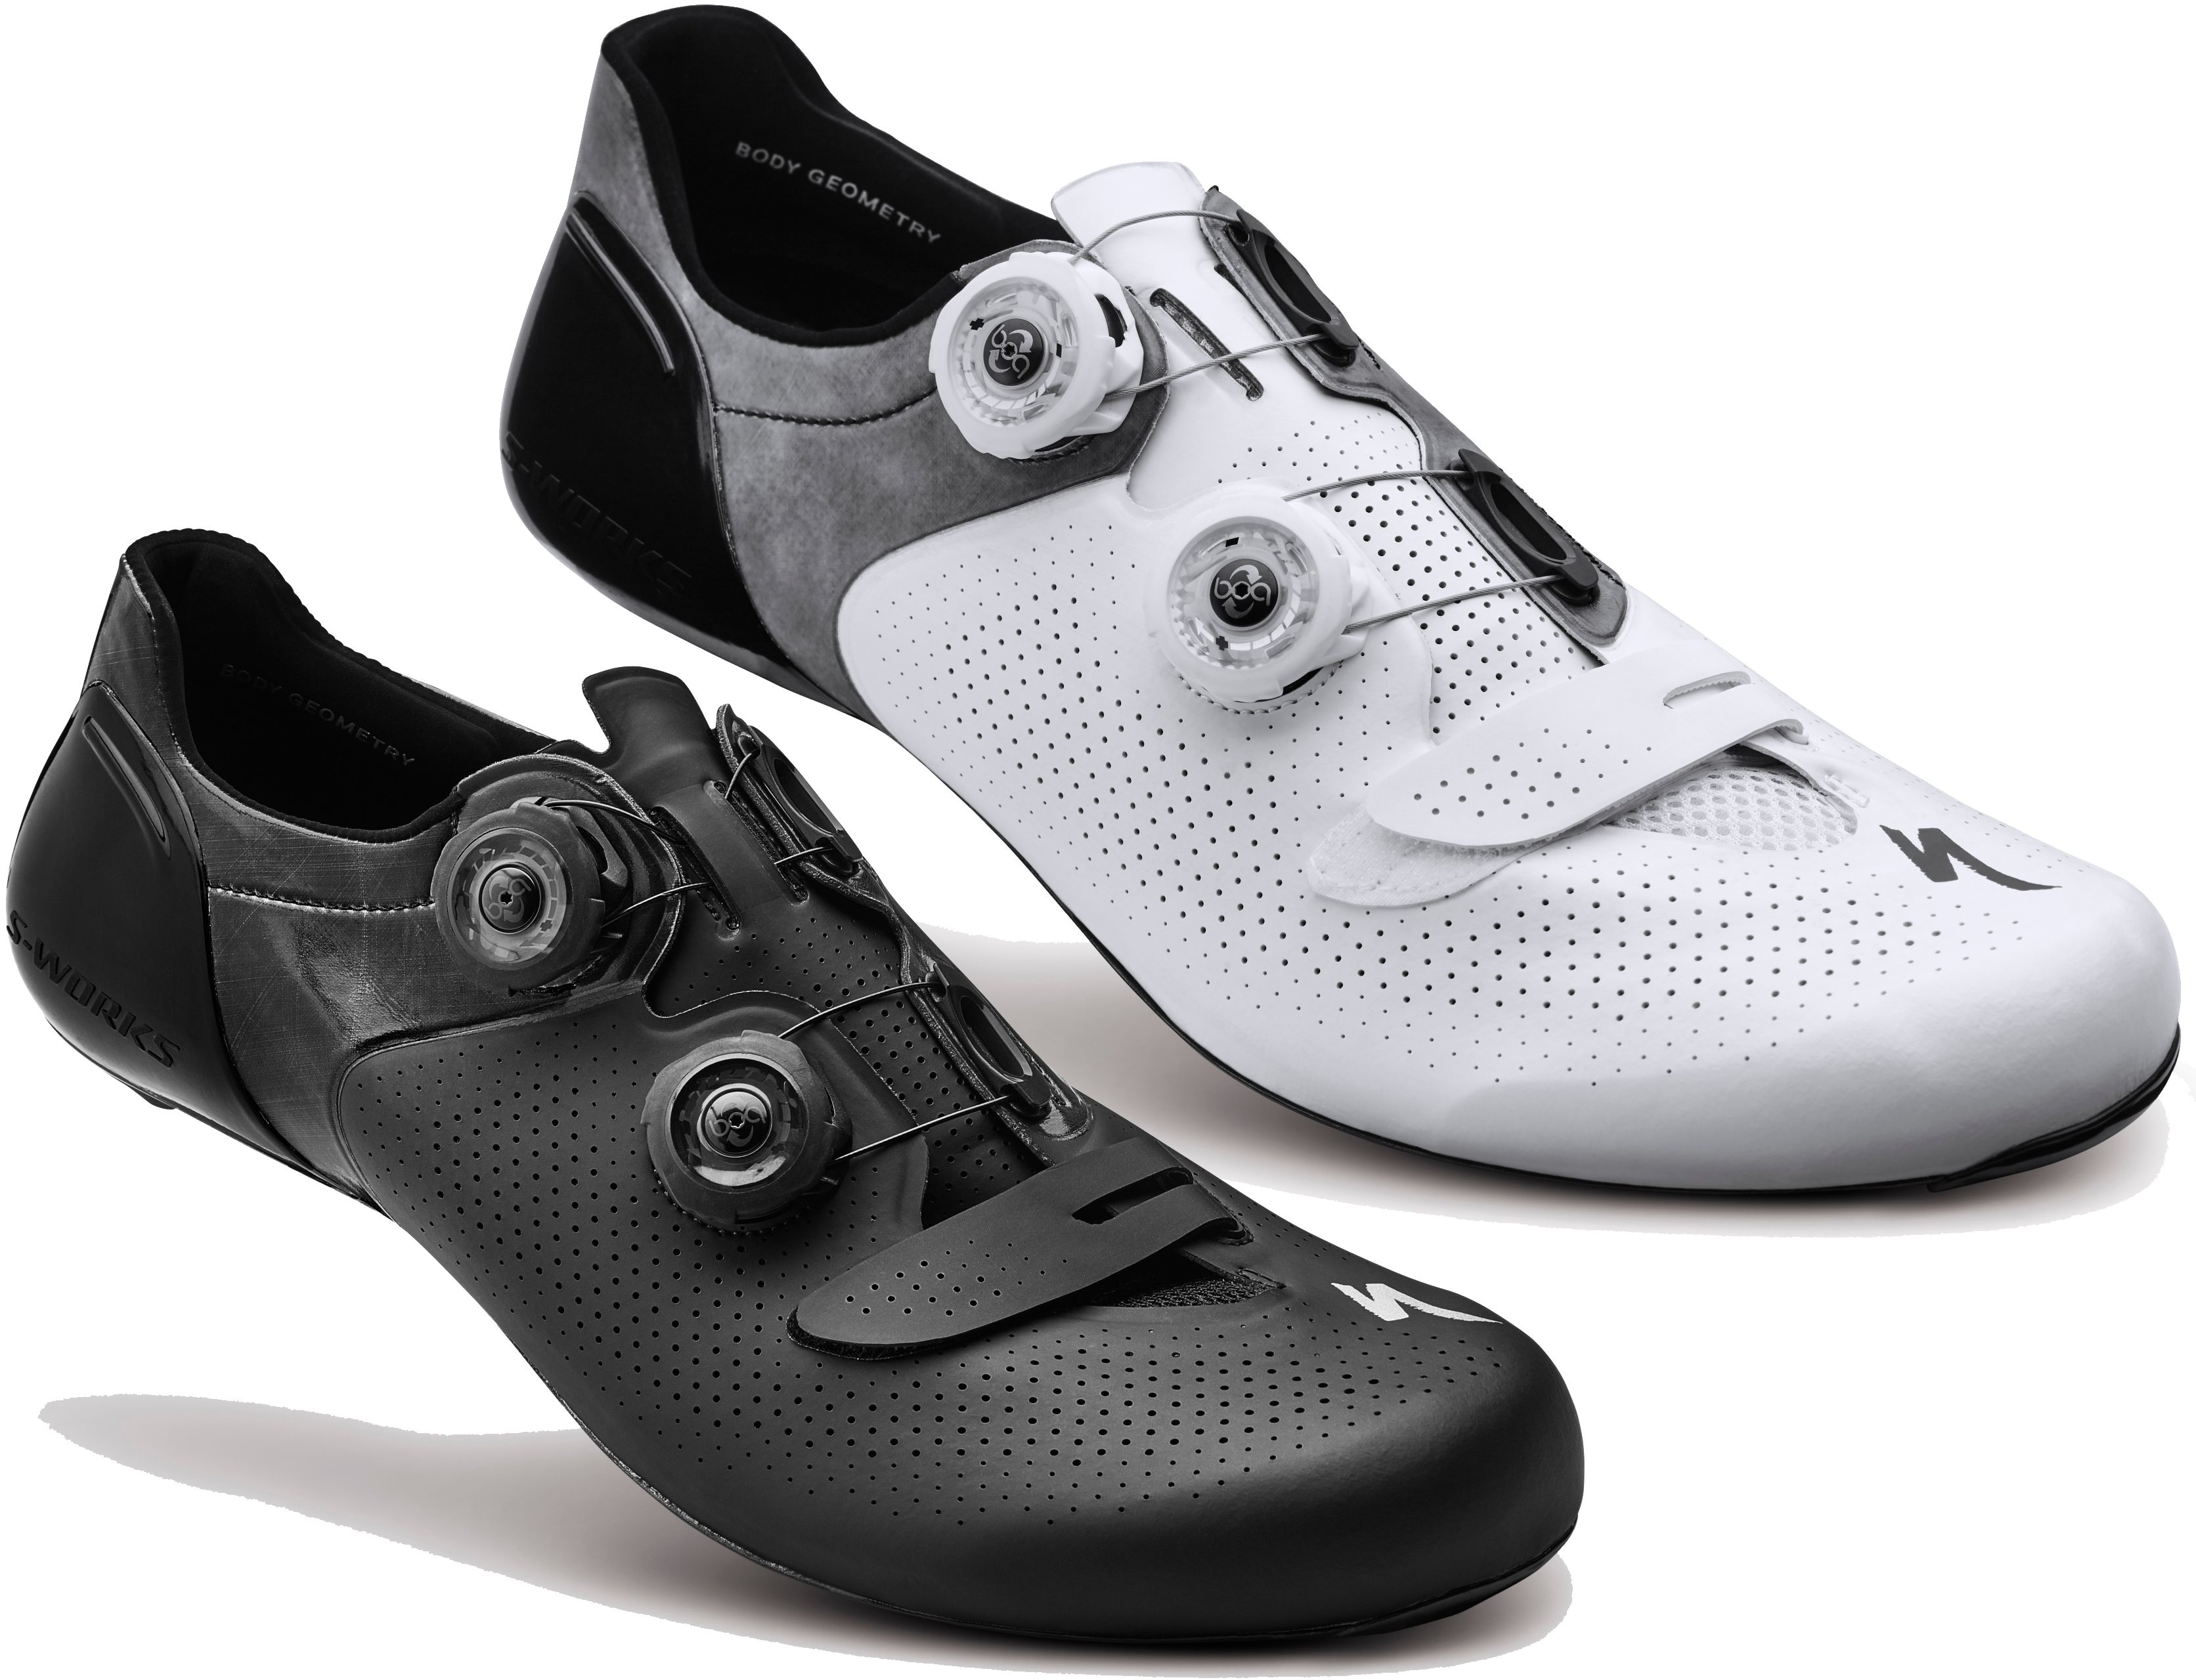 Specialized S-WORKS 6 Road Shoe - £185.99 | Shoes - Road Cycling ...